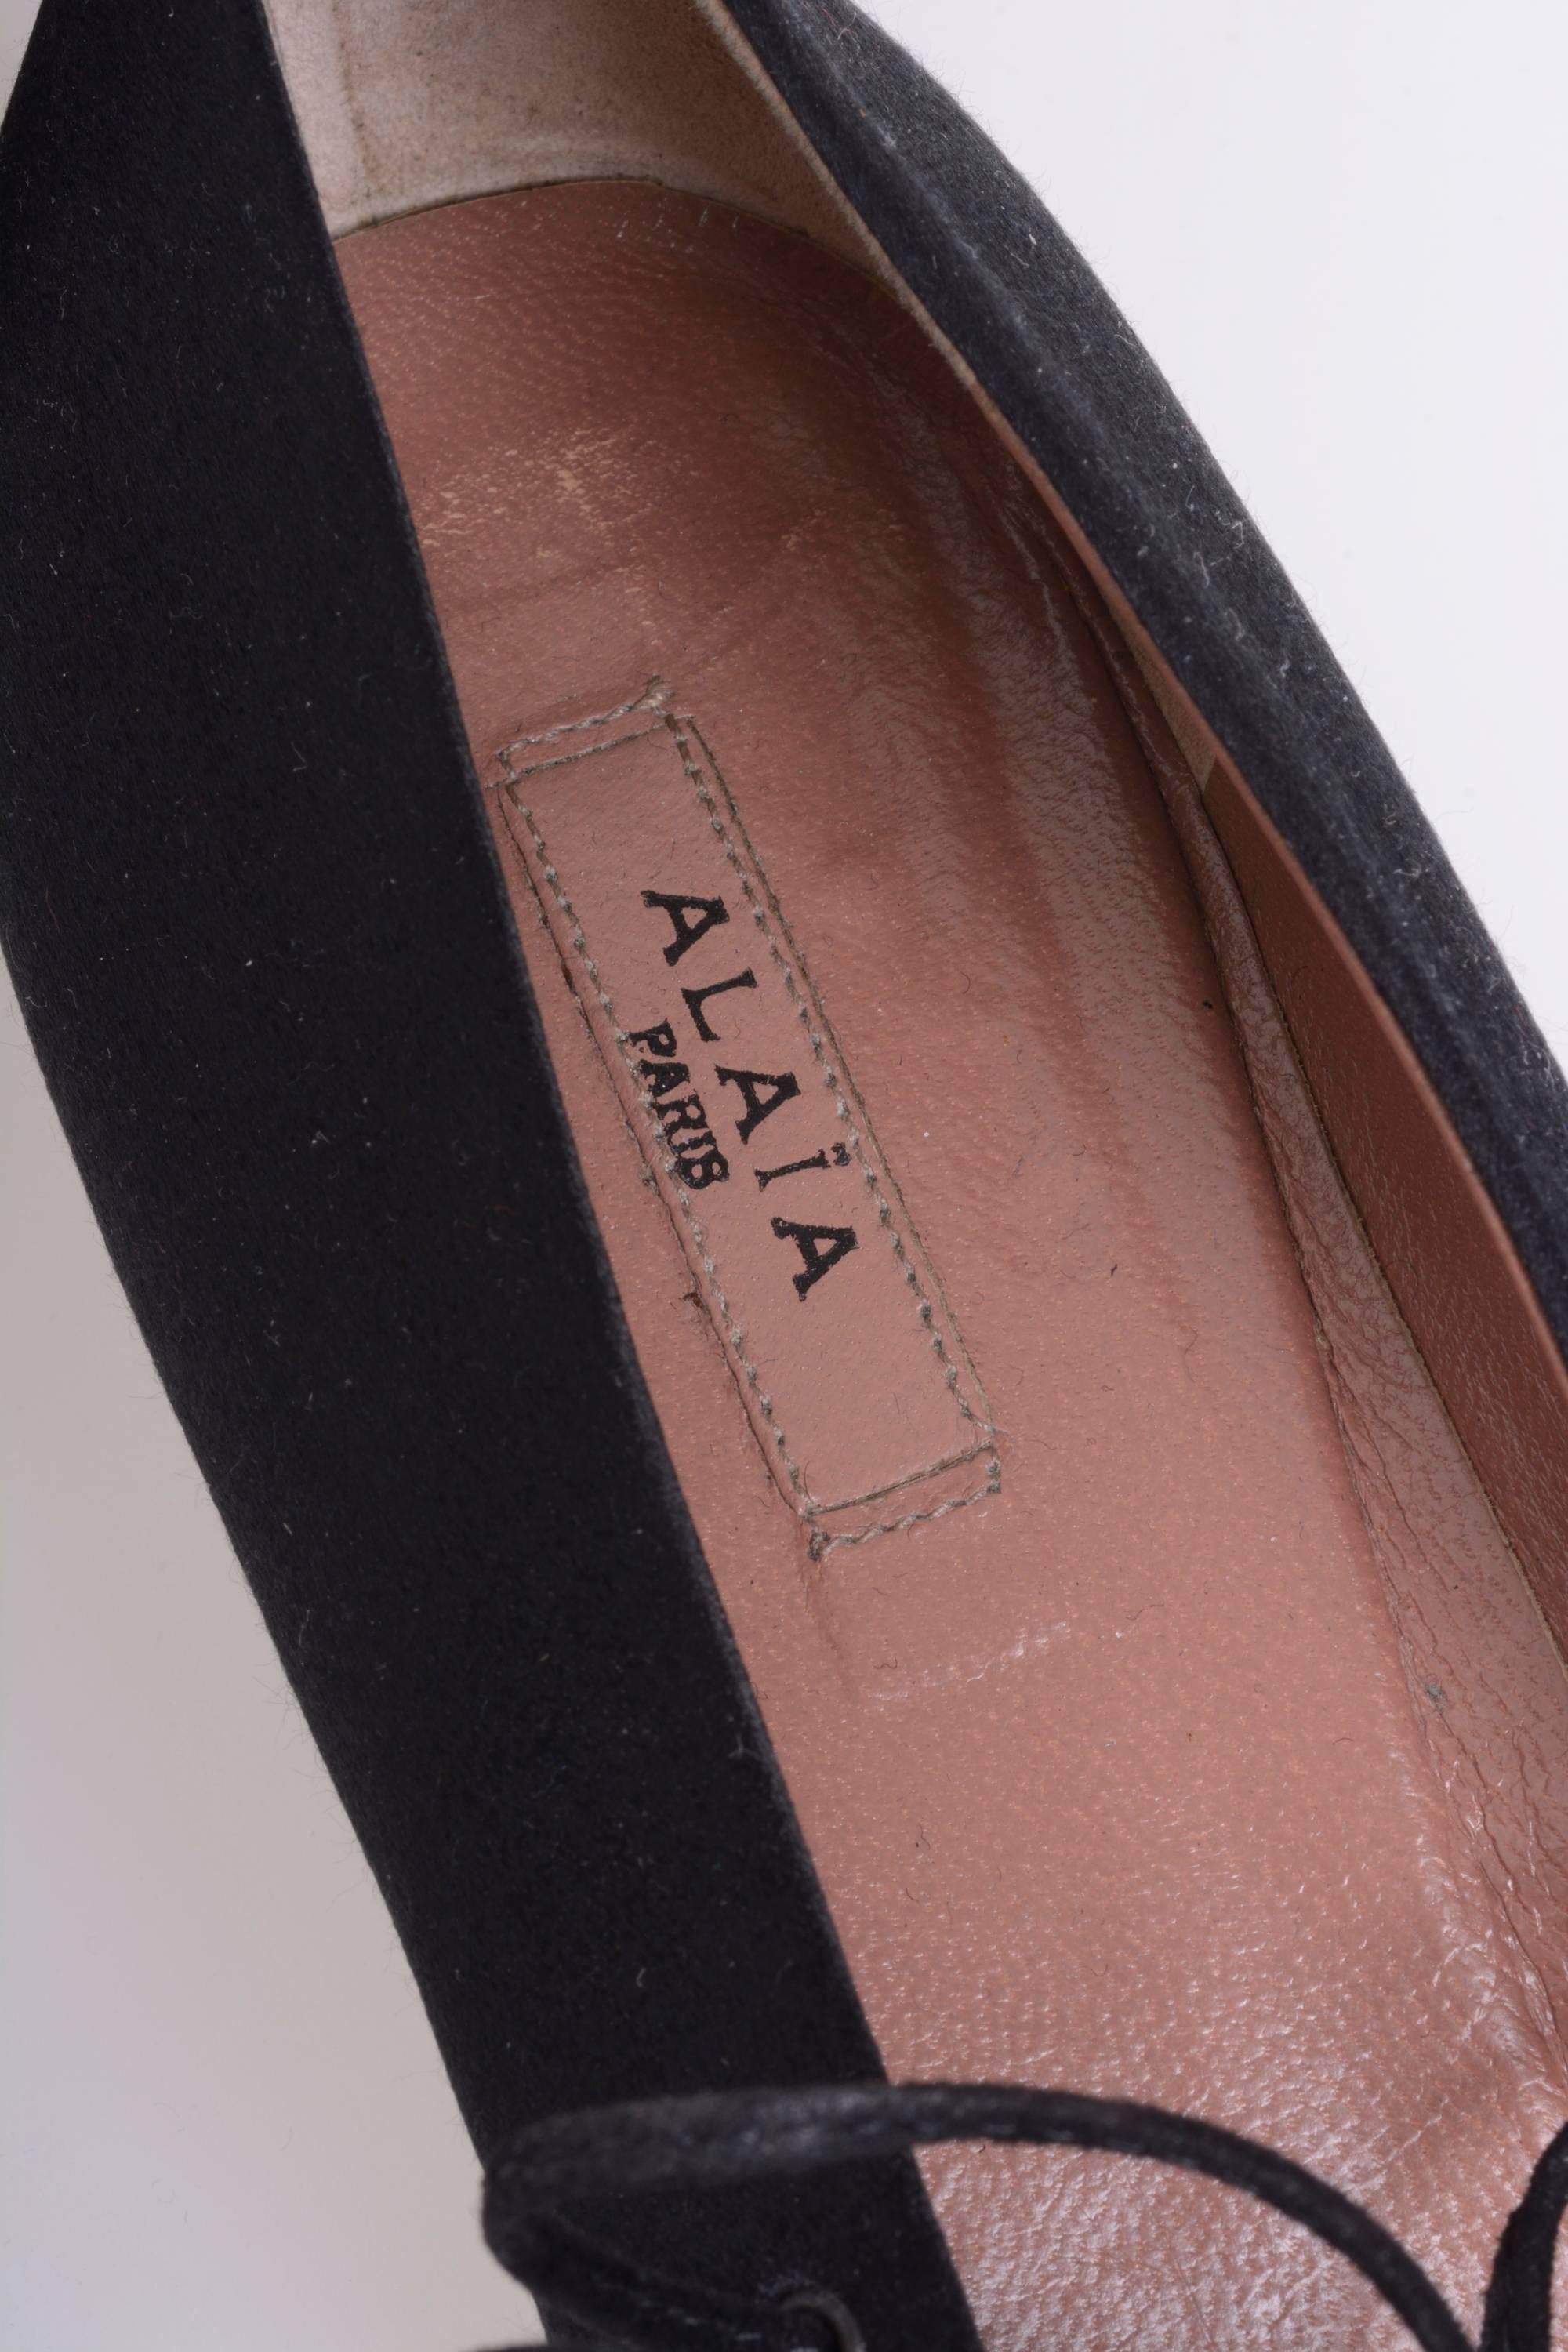 Alaia Black Satin Lace Up Ankle Ties Ballet Slippers Shoes 37EU In Good Condition For Sale In Milan, Italy